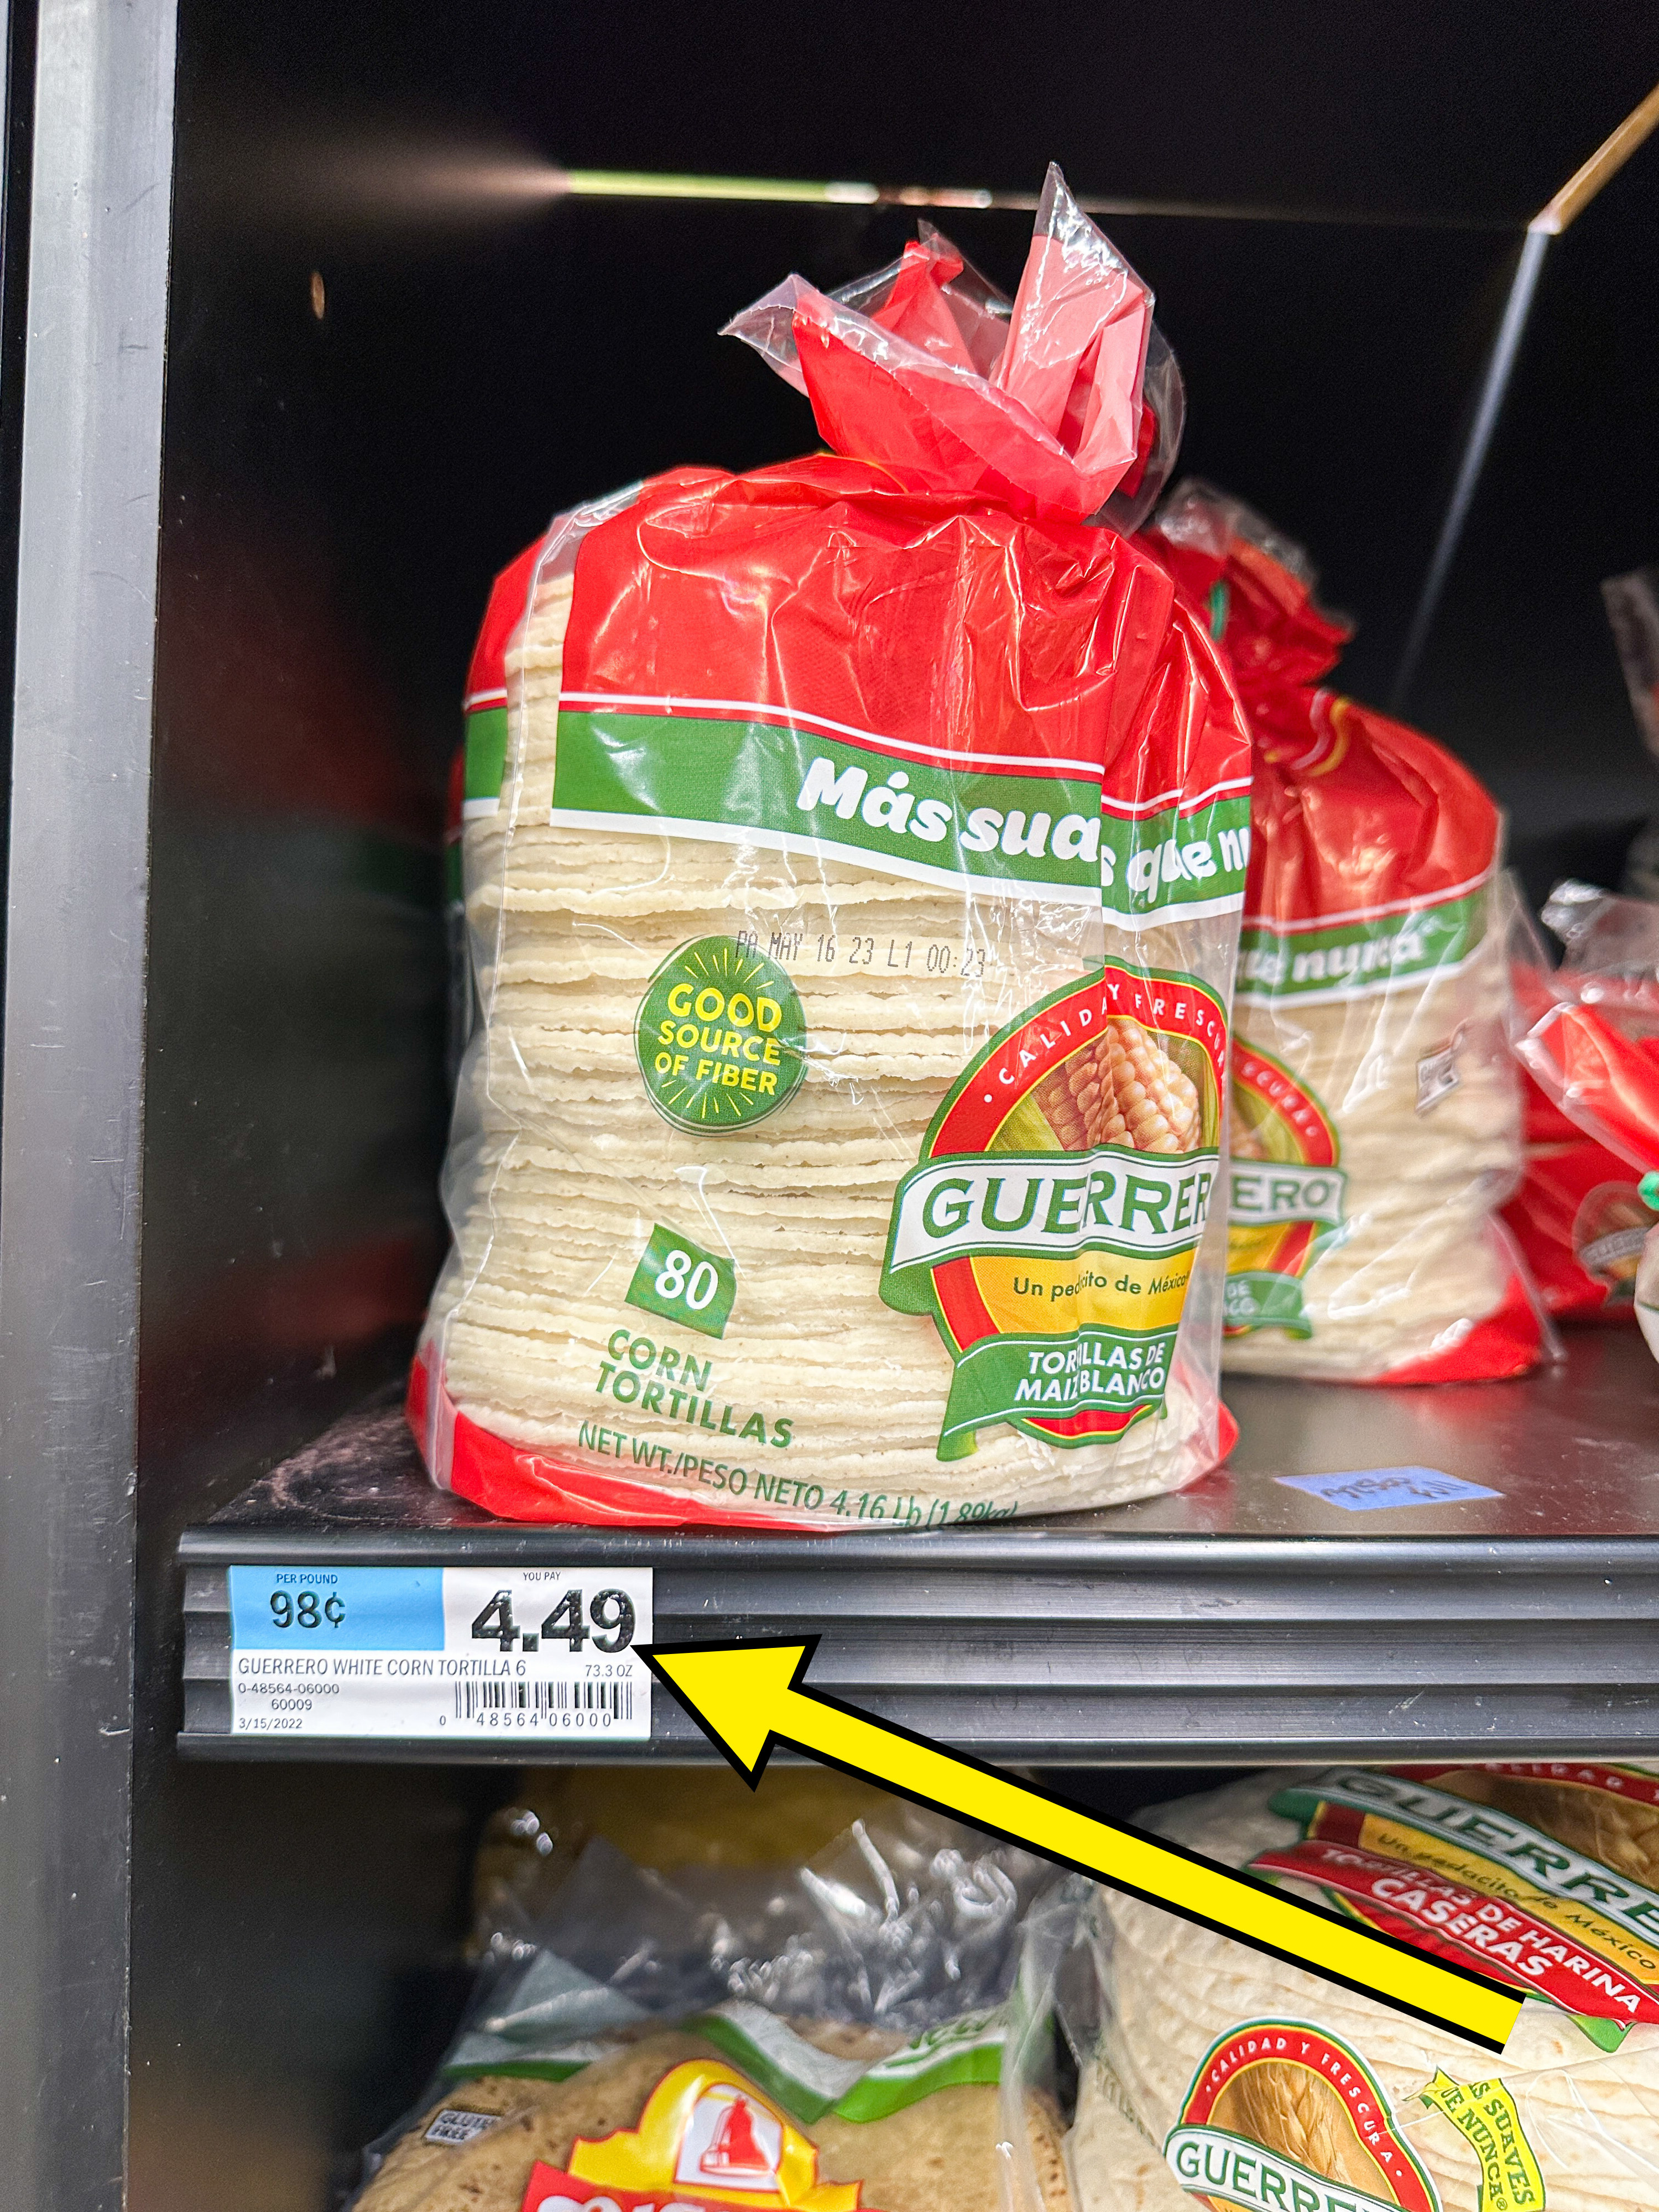 arrow pointing to tortillas for 4.49